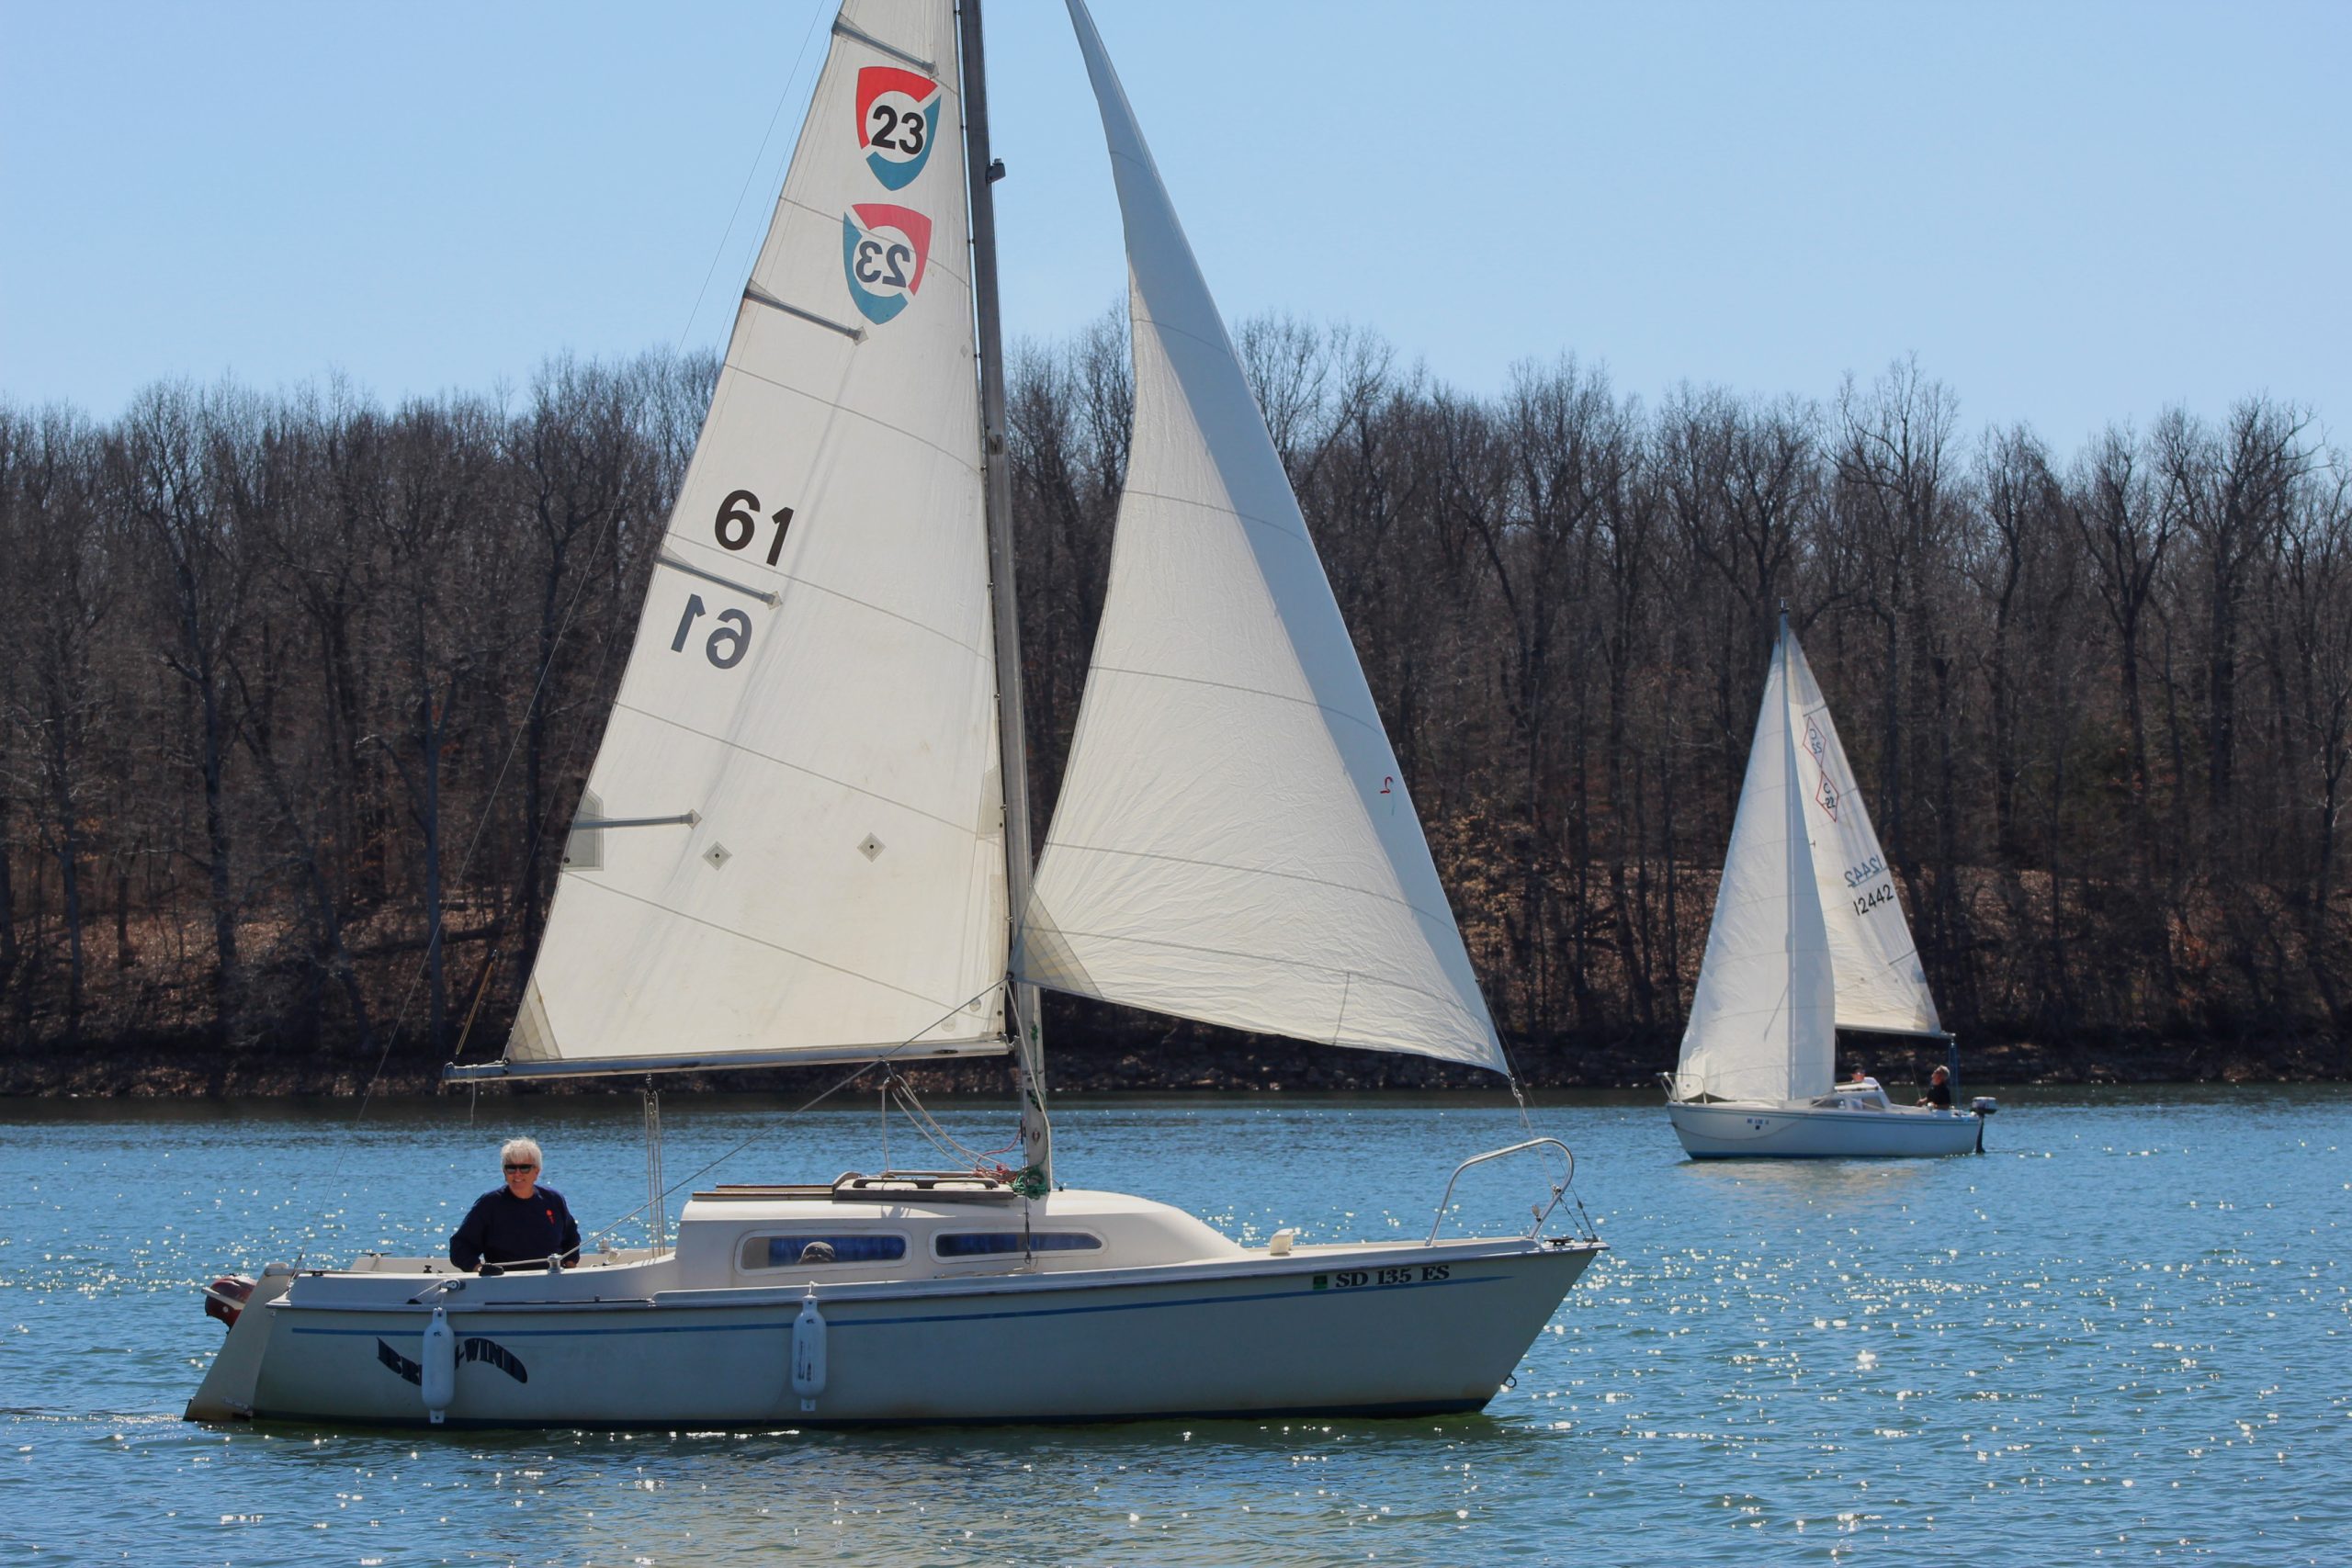 You can now rent a sailboat — and take sailing lessons — on Fellows Lake